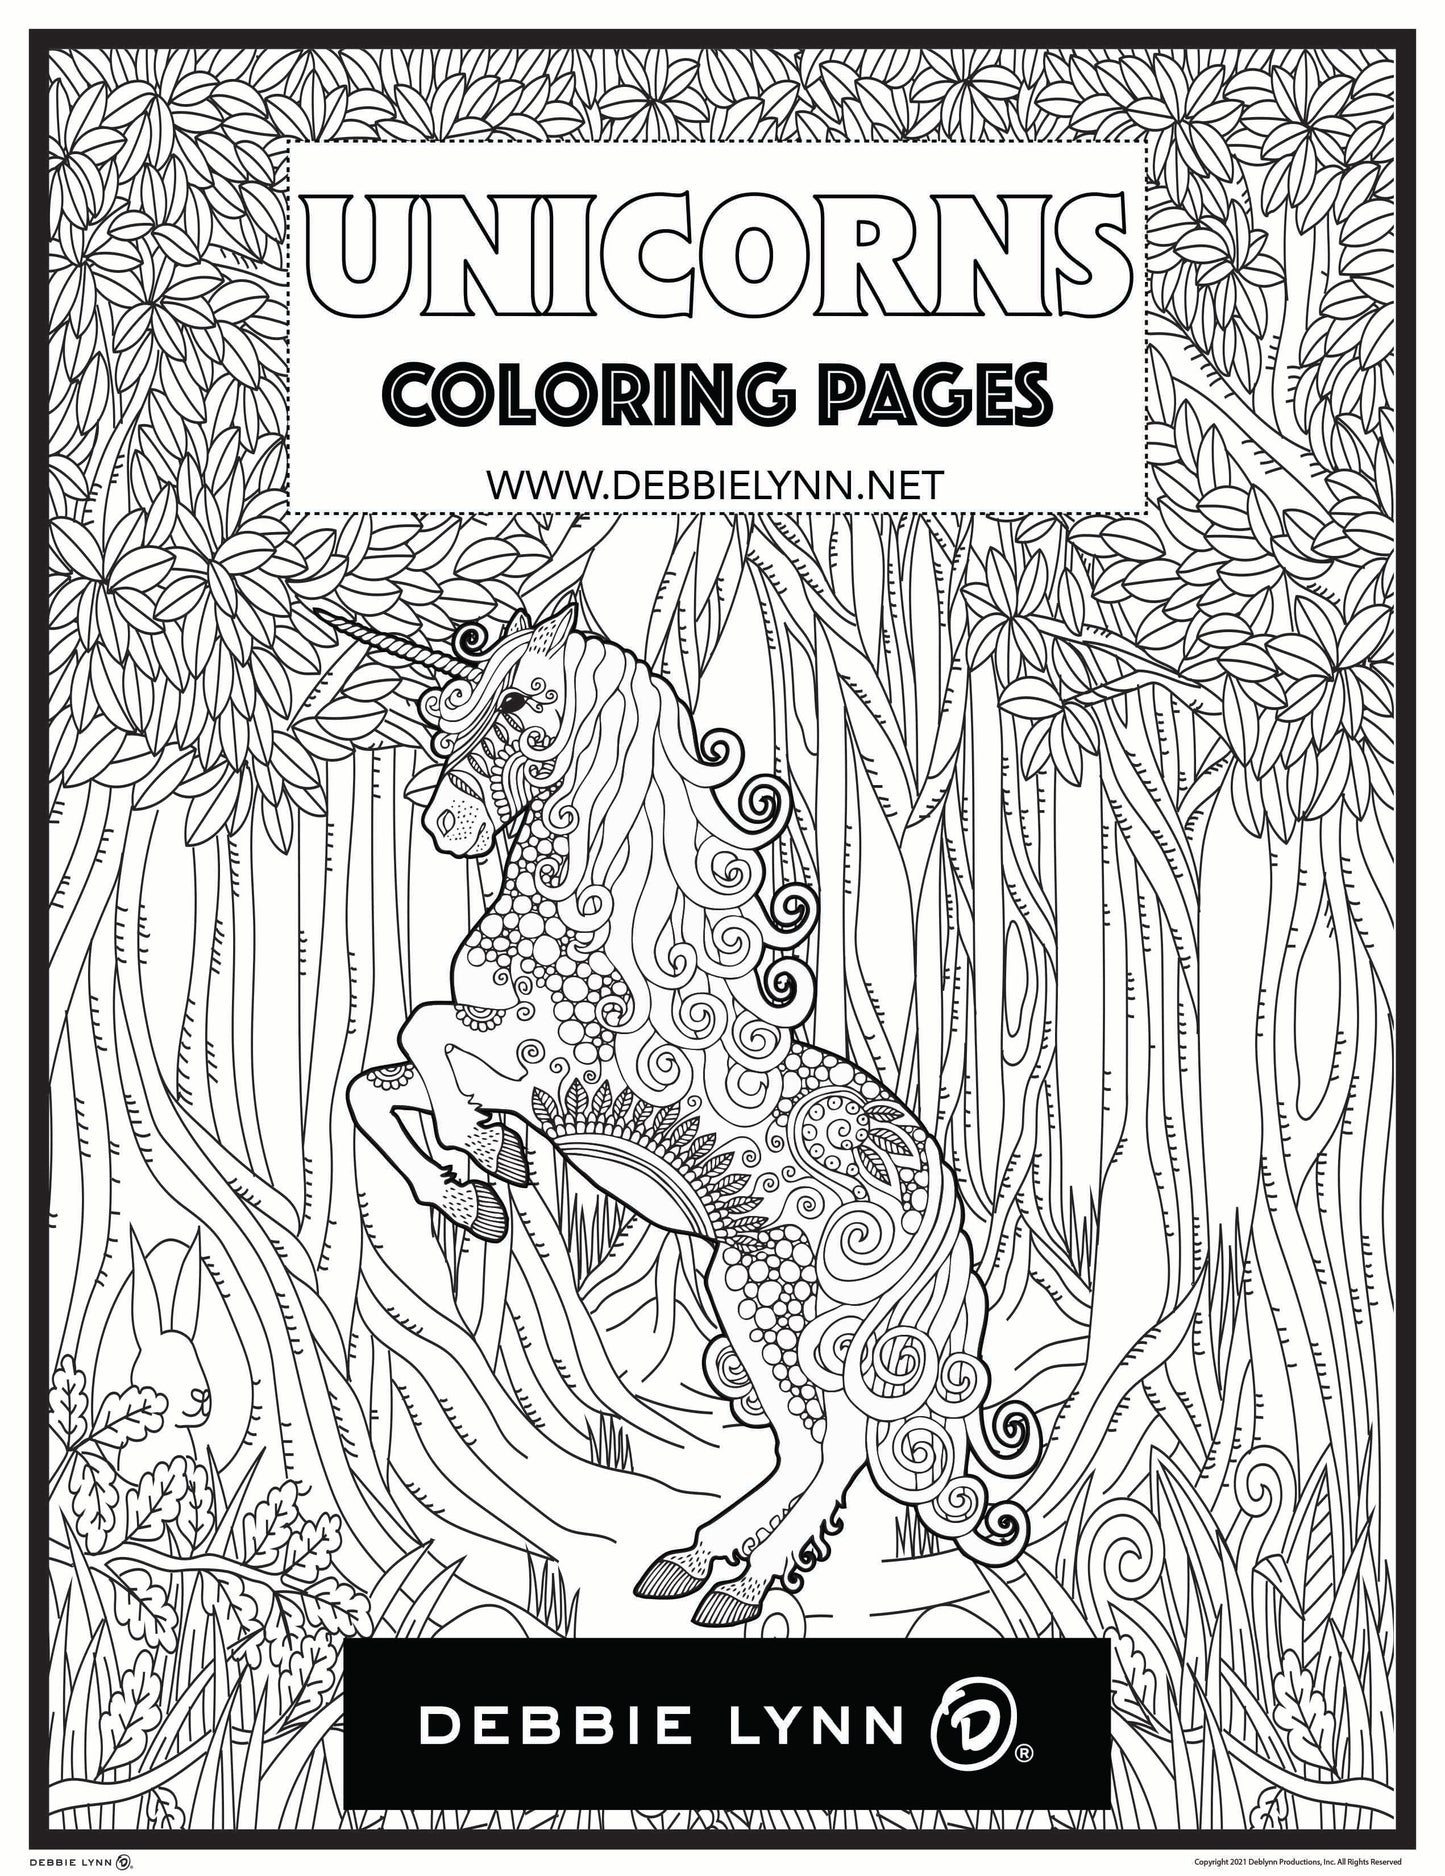 Hard Unicorn Coloring Page For Adults and Teens 